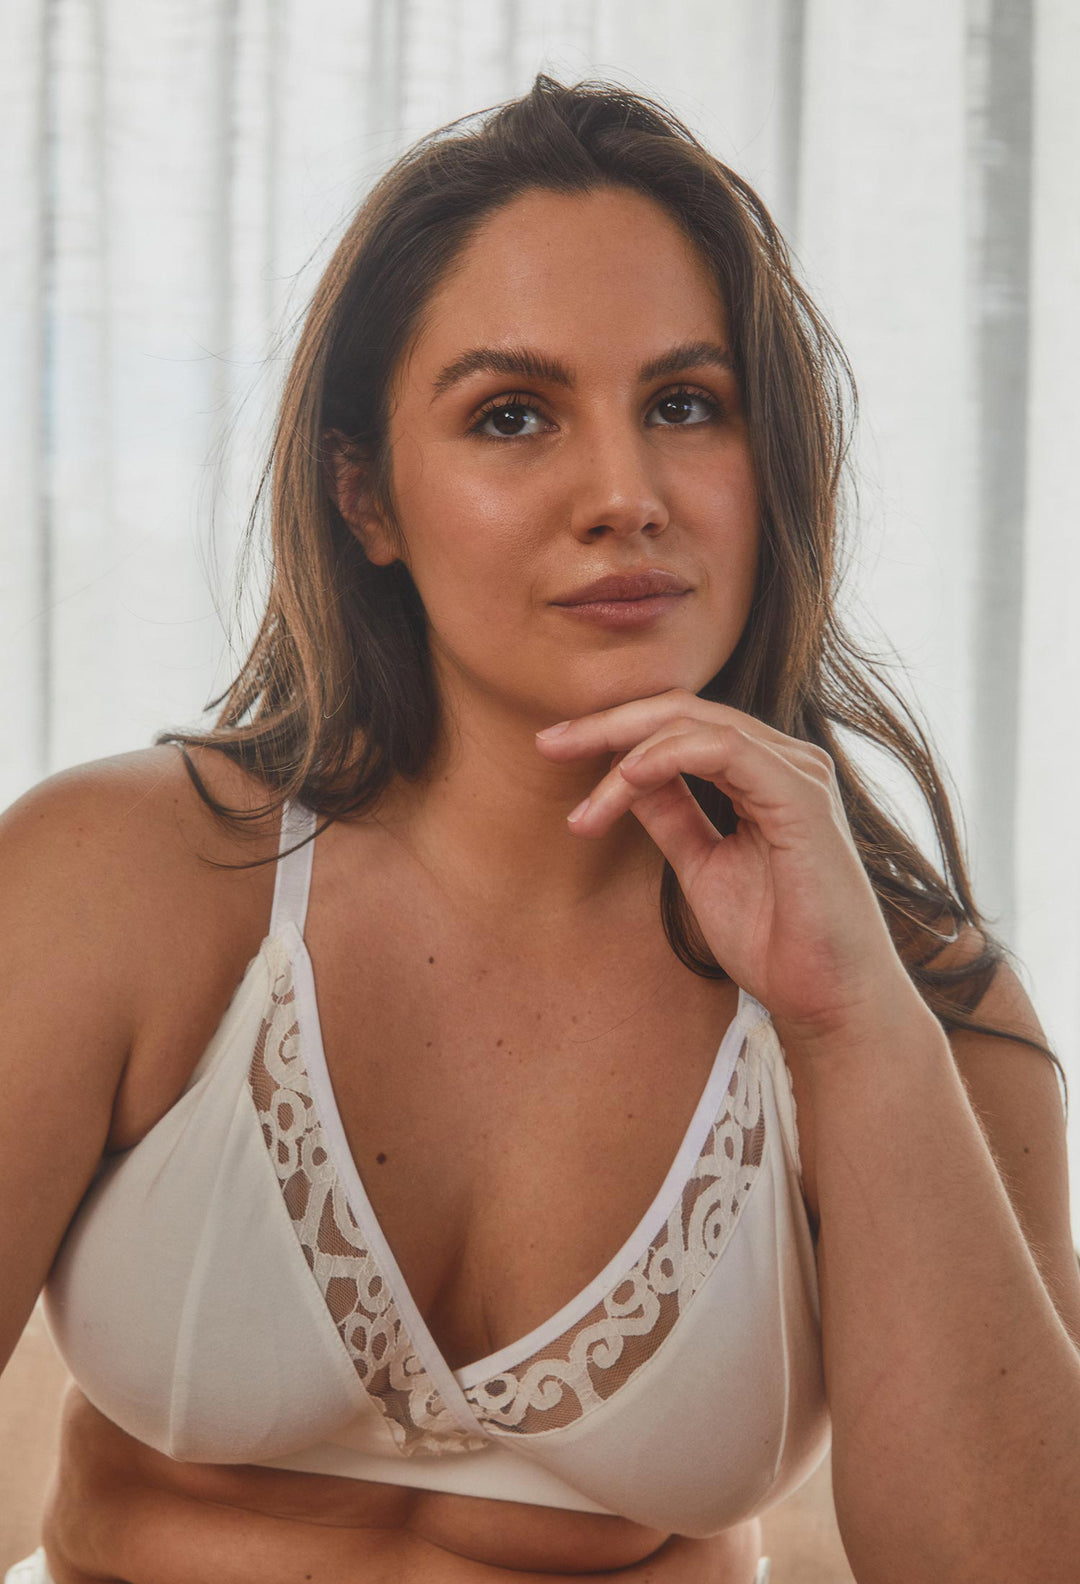 model wearing full cup bralette in natural colour with lace trim